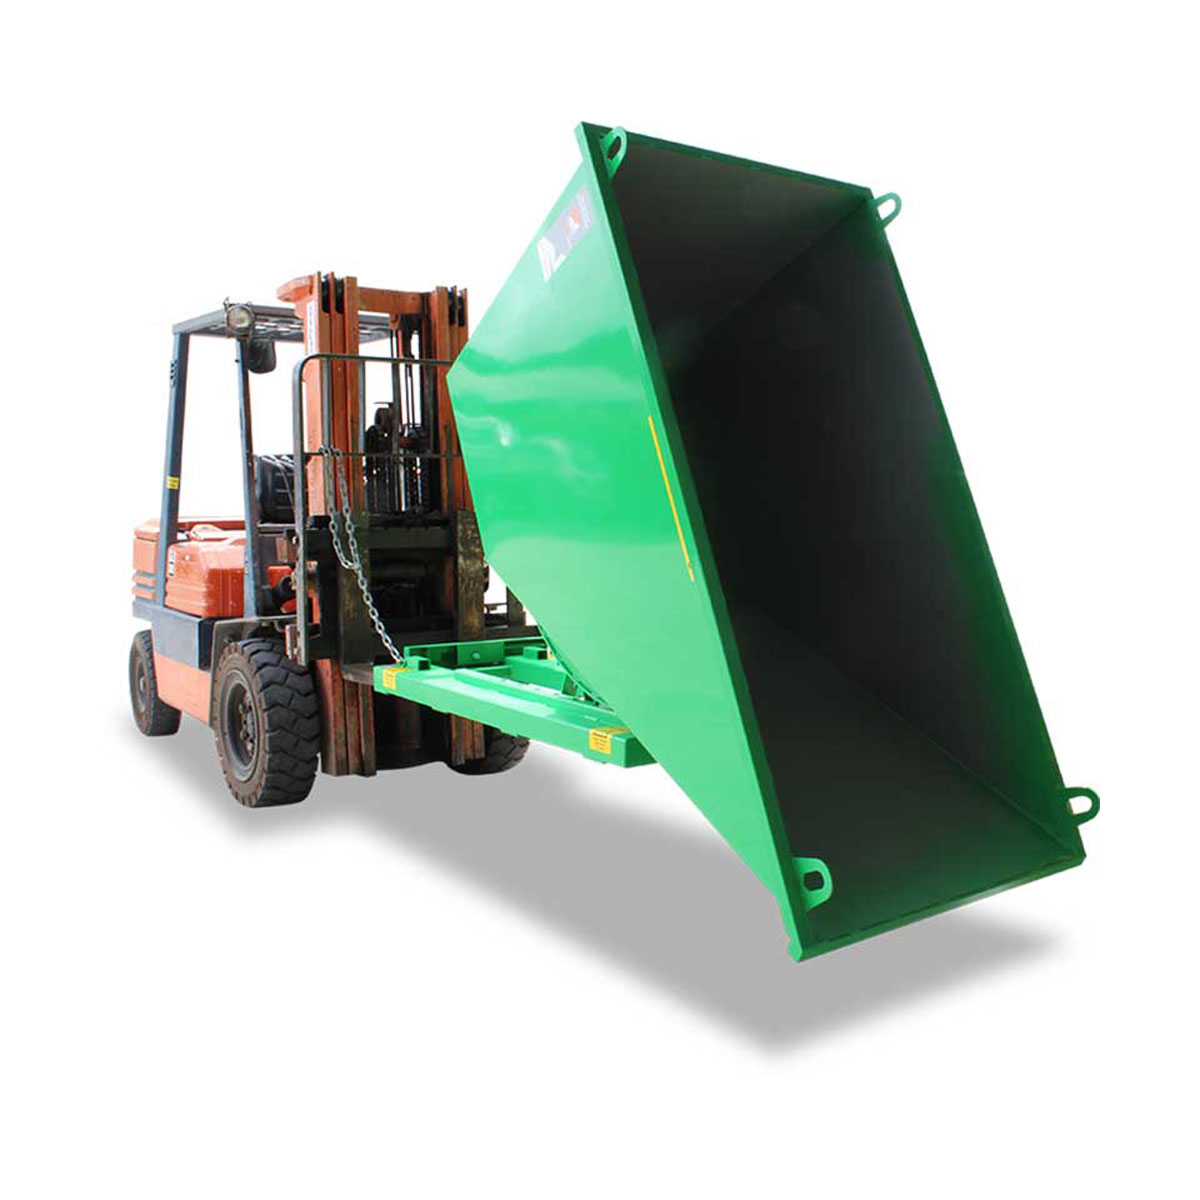 Buy Hopper - Self-tipping Forklift Attachment in Forklift Attachments from Astrolift NZ